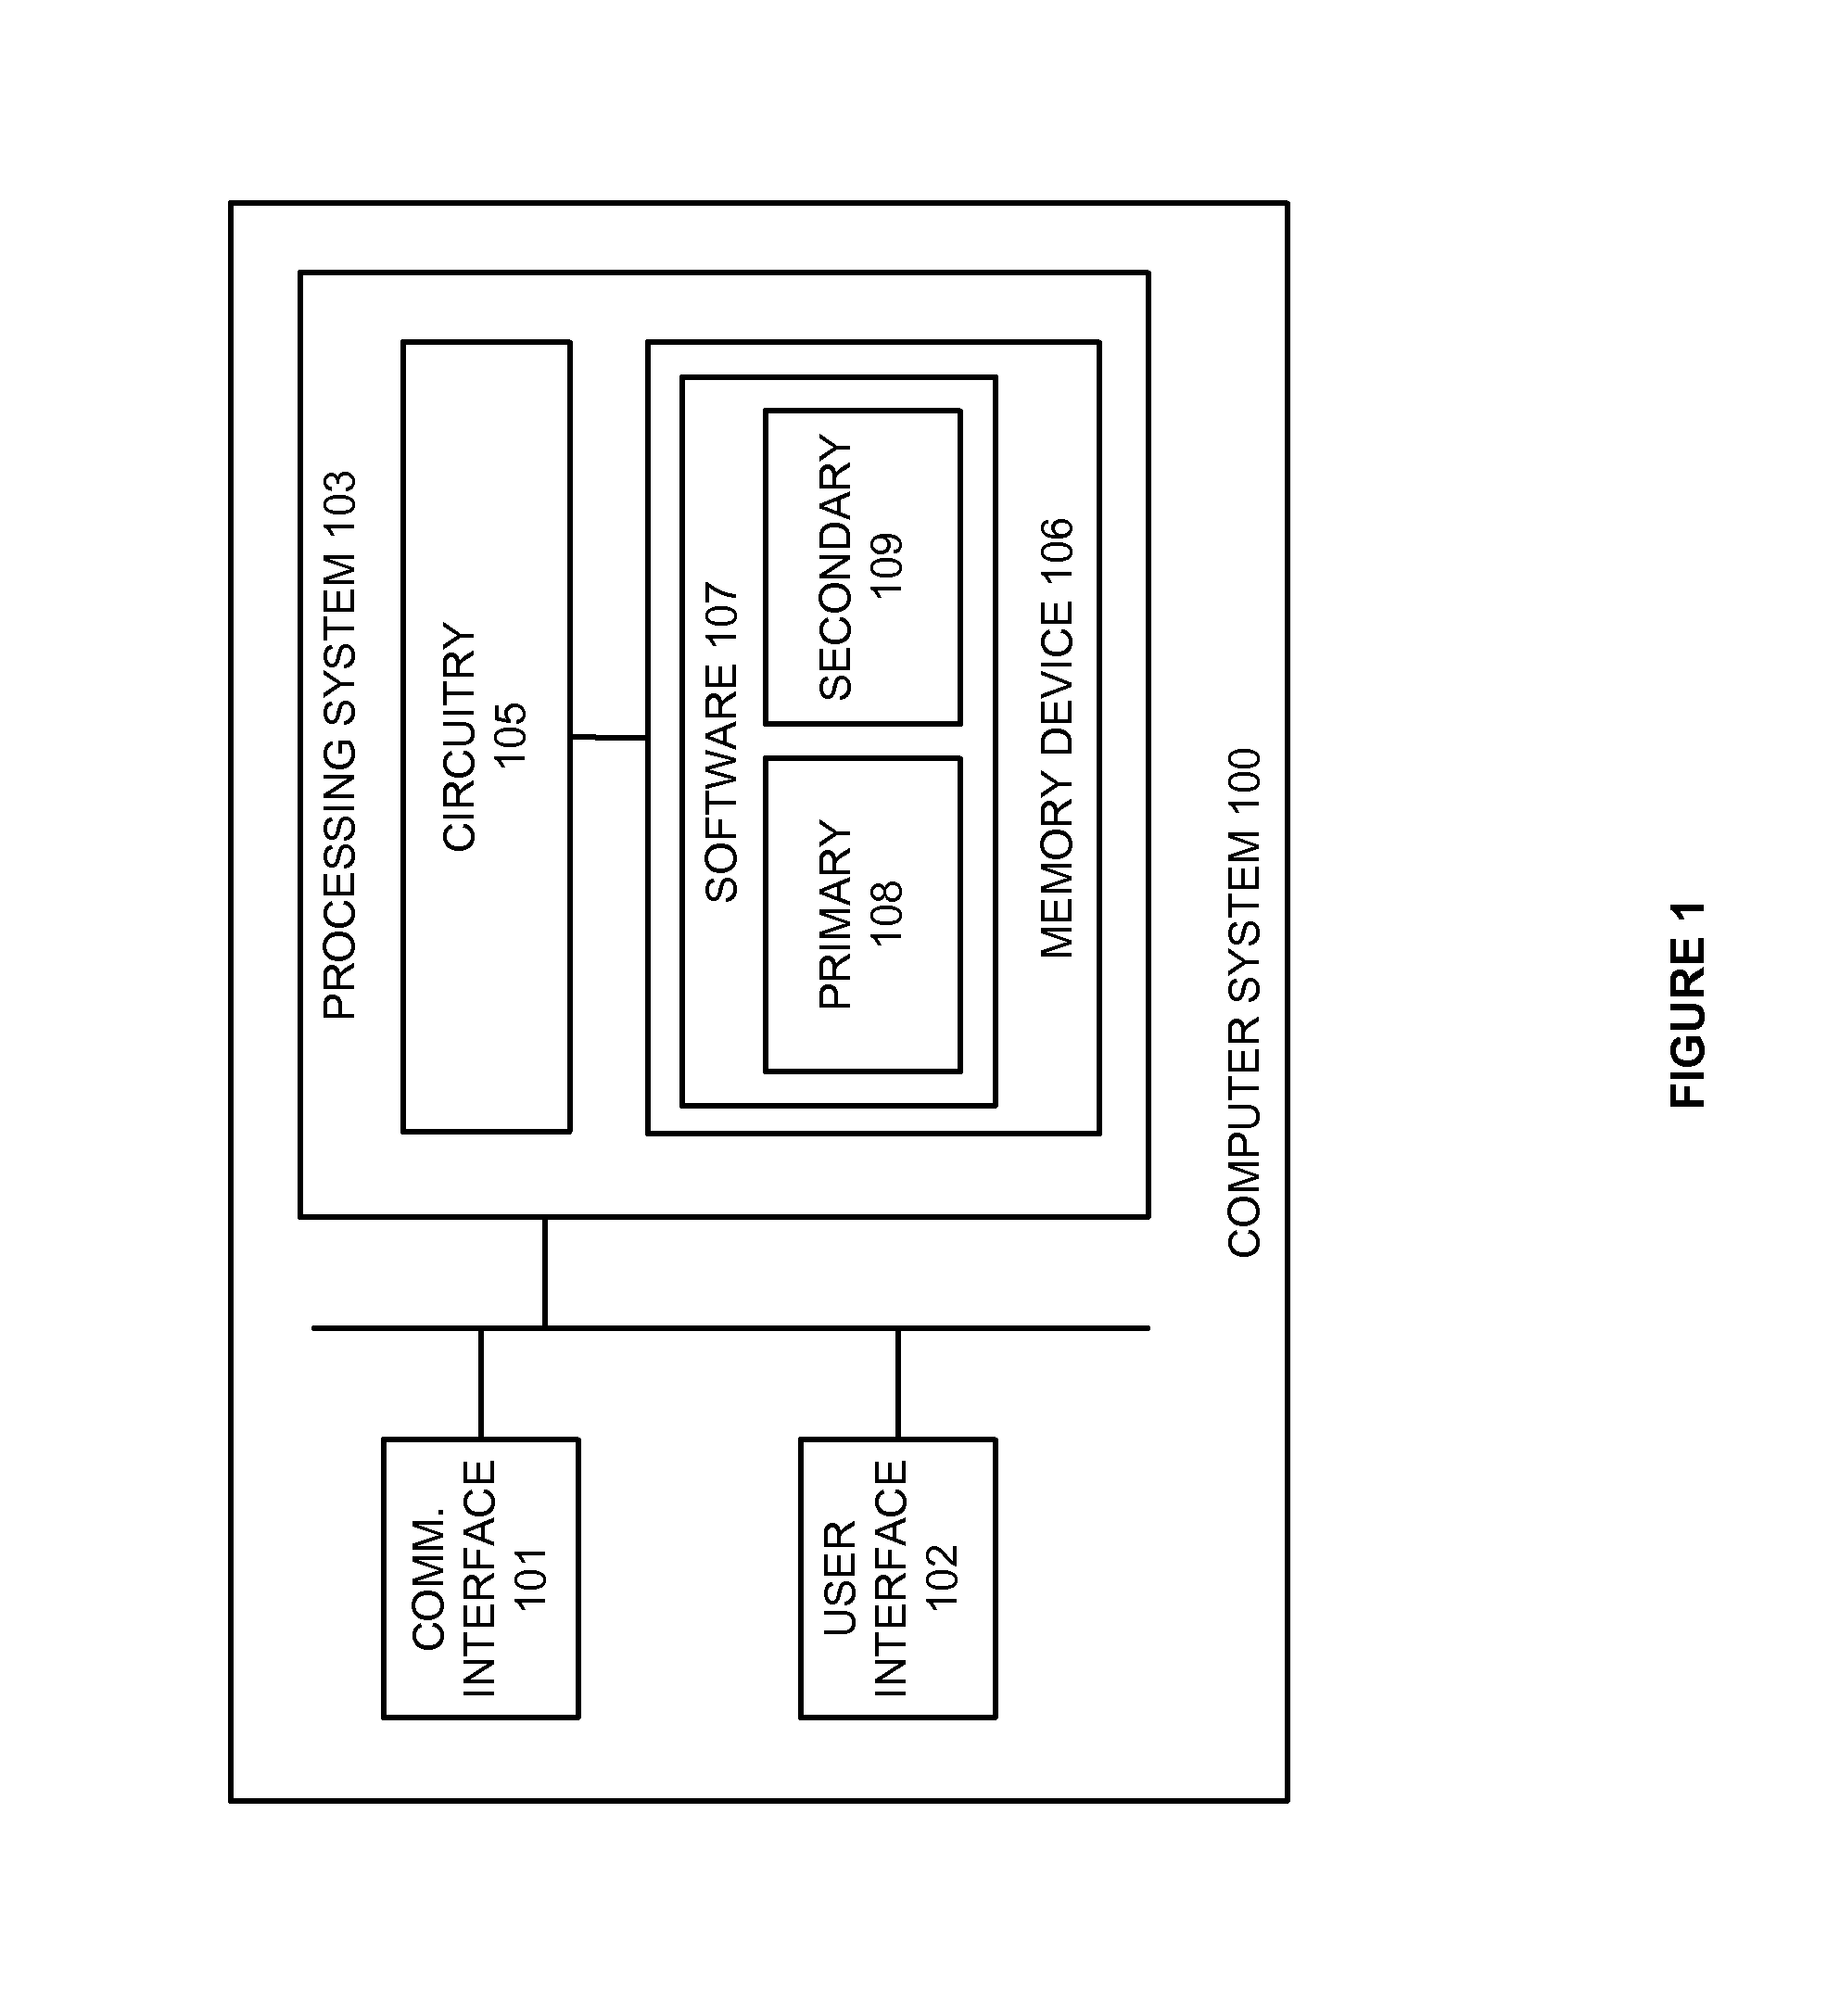 Event processing using existing computer event capture modules